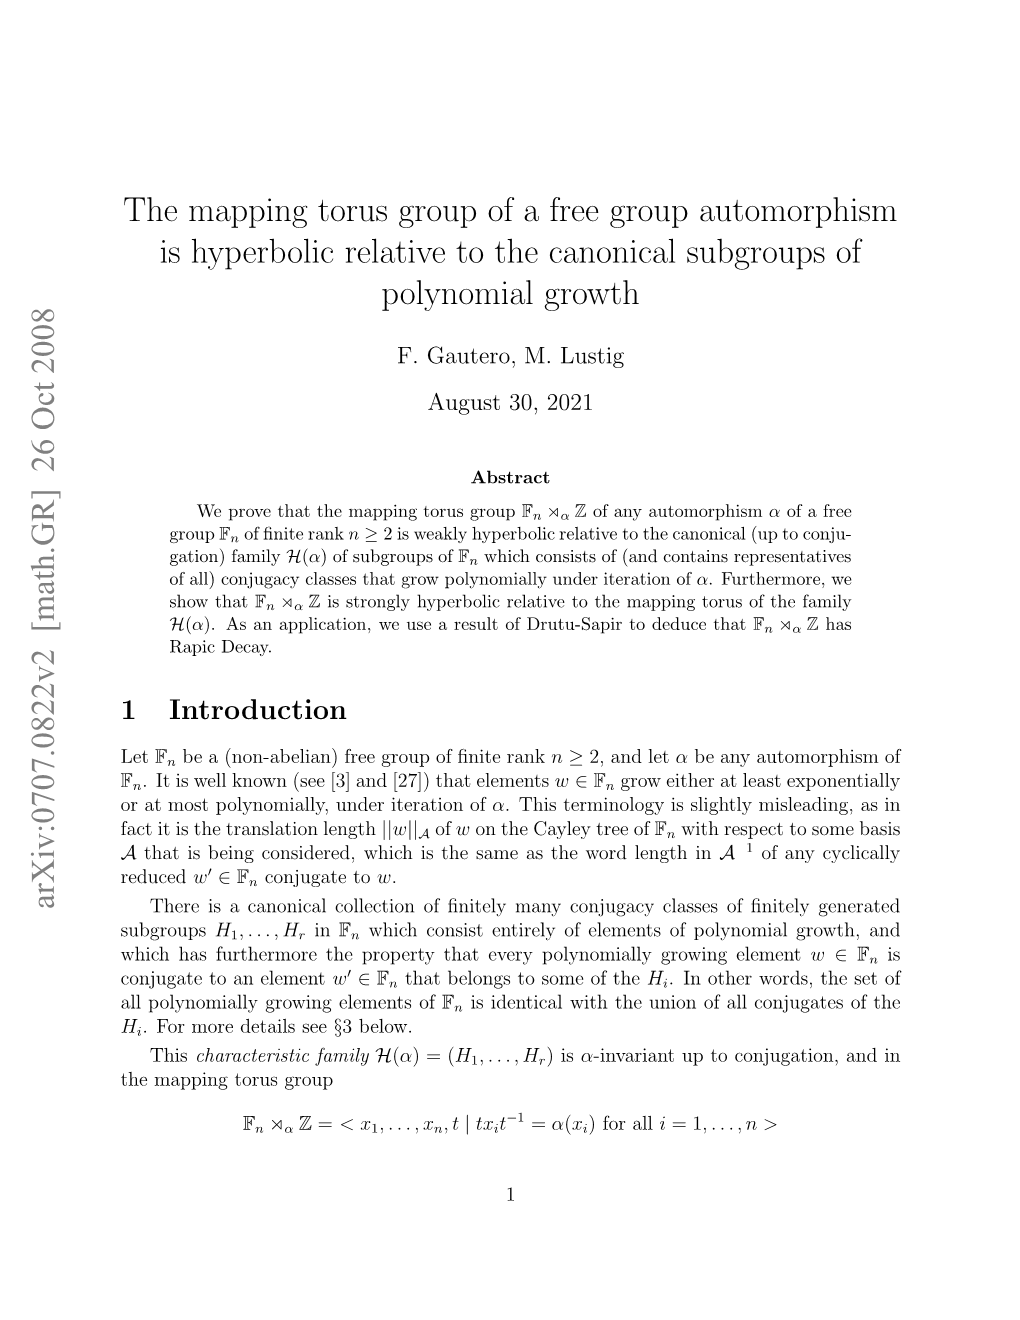 The Mapping-Torus of a Free Group Automorphism Is Hyperbolic Relative